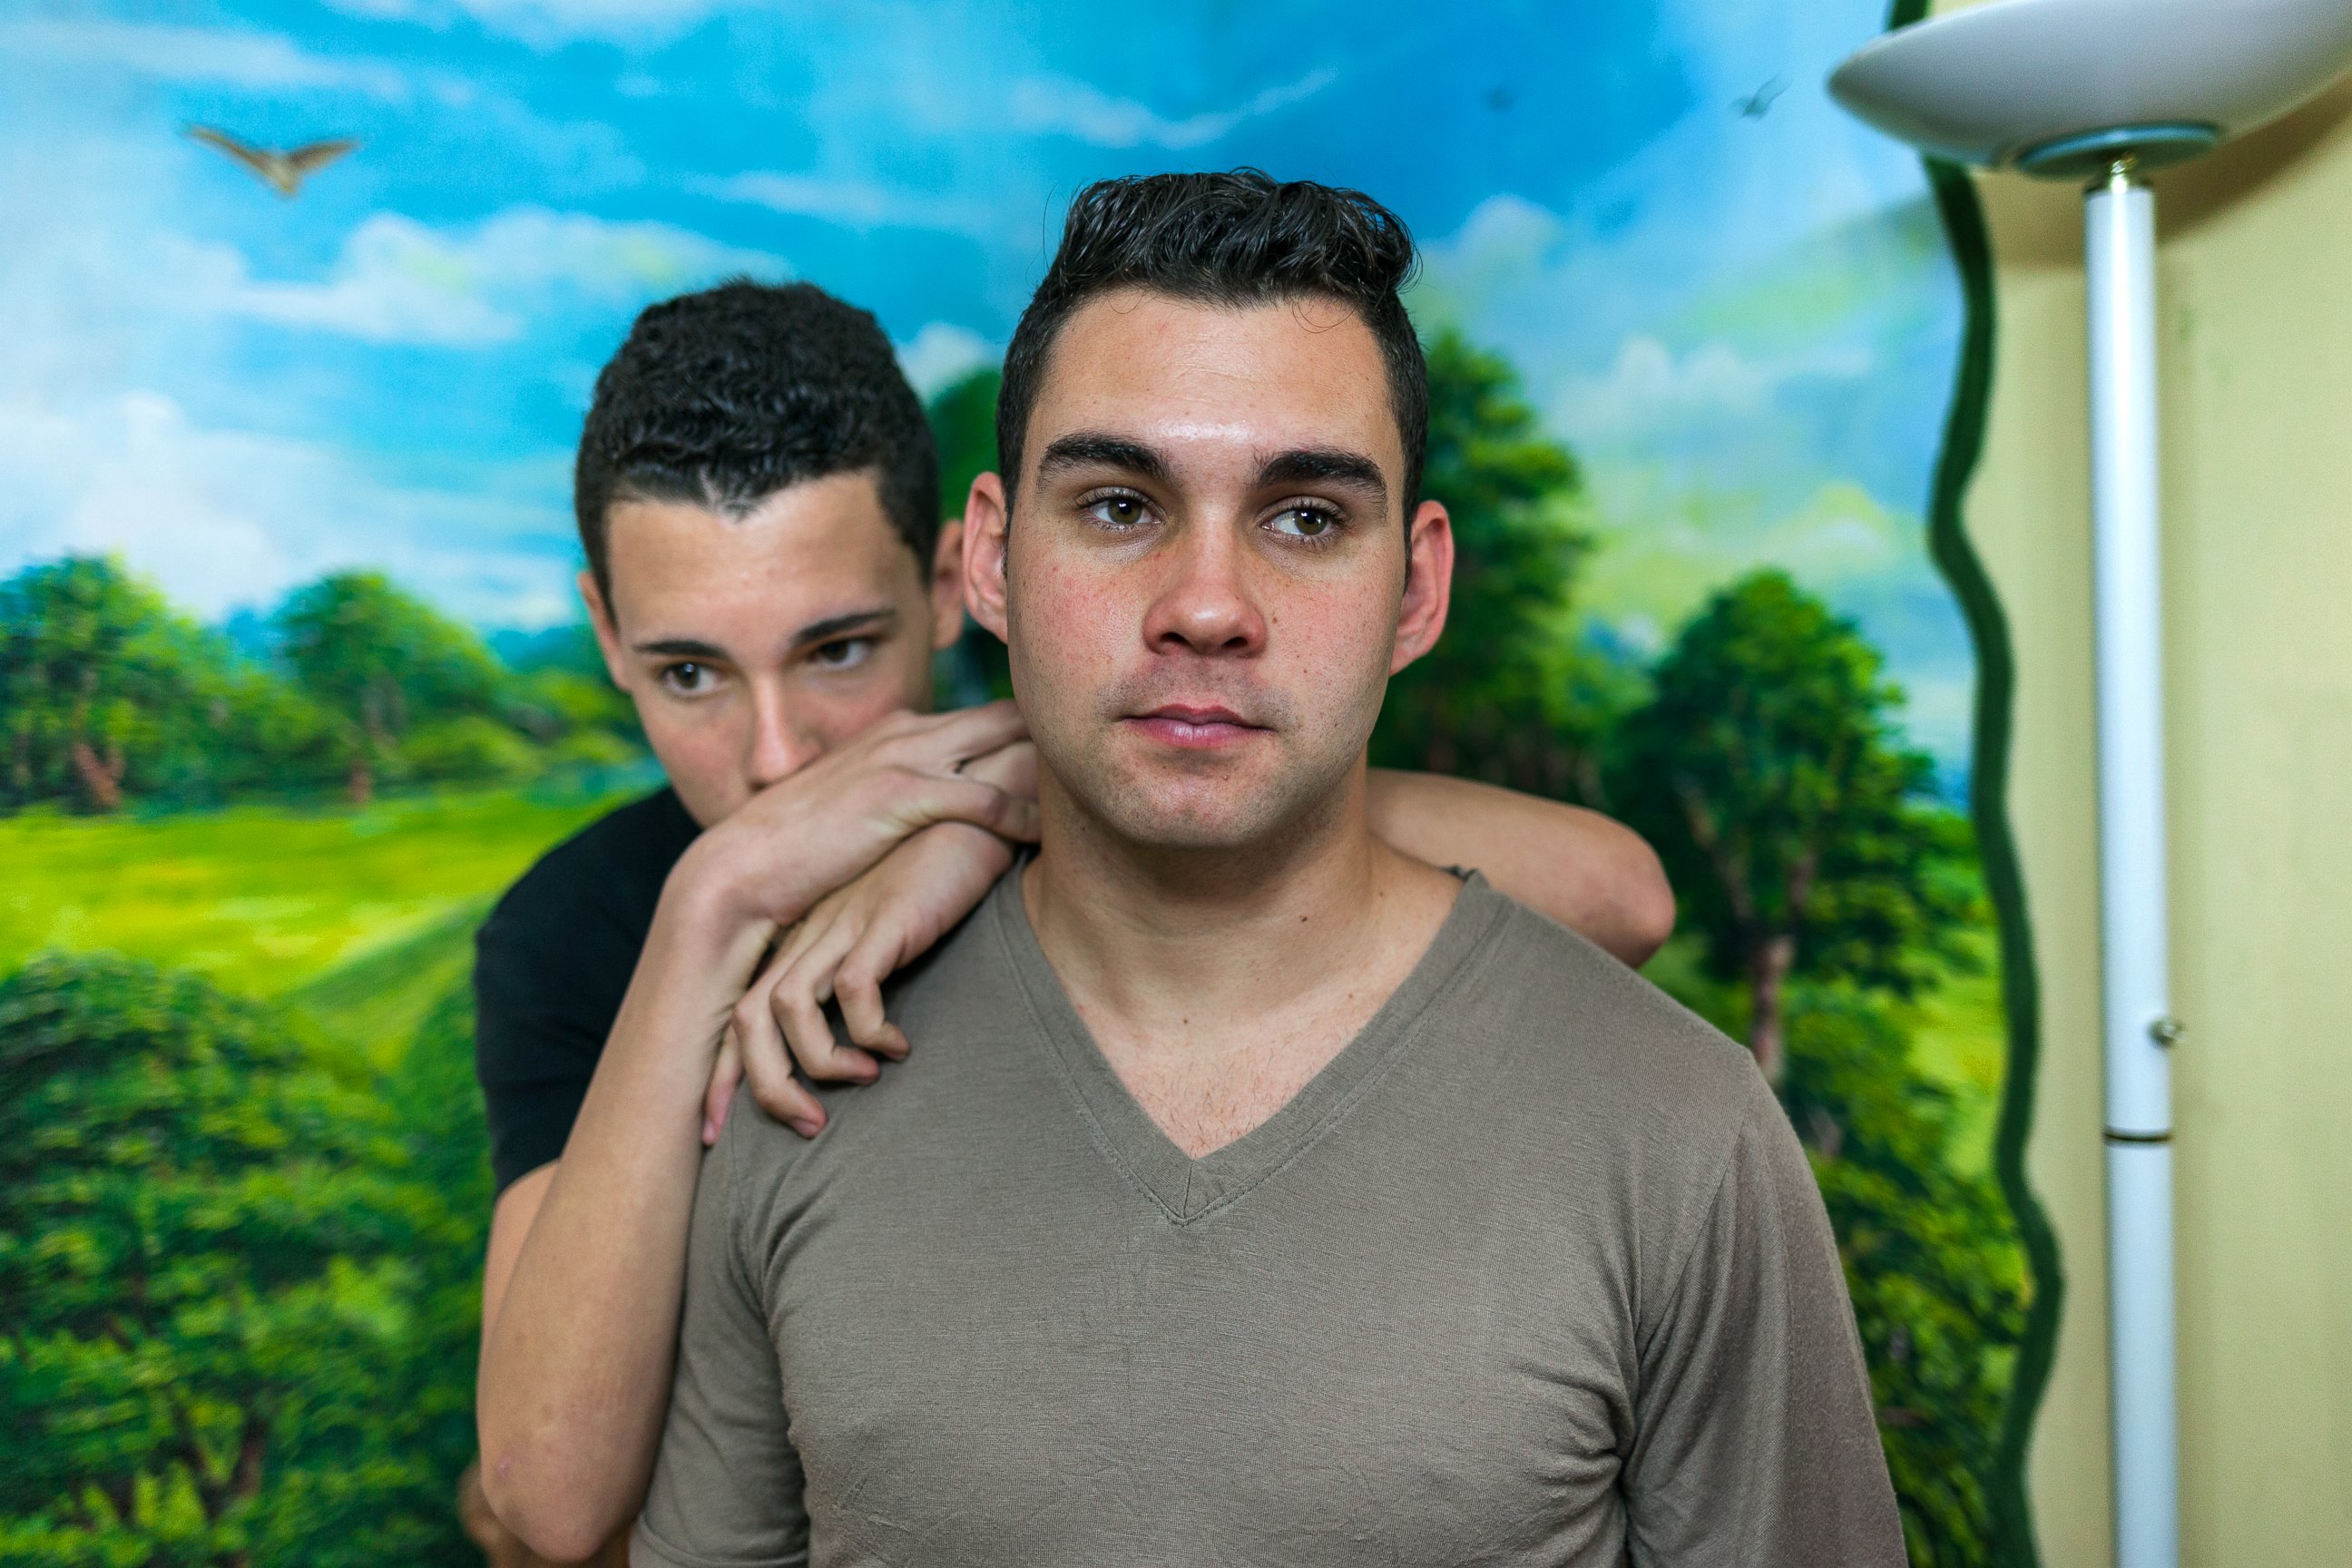 PHOTO: Elian Gonzalez poses with his brother.